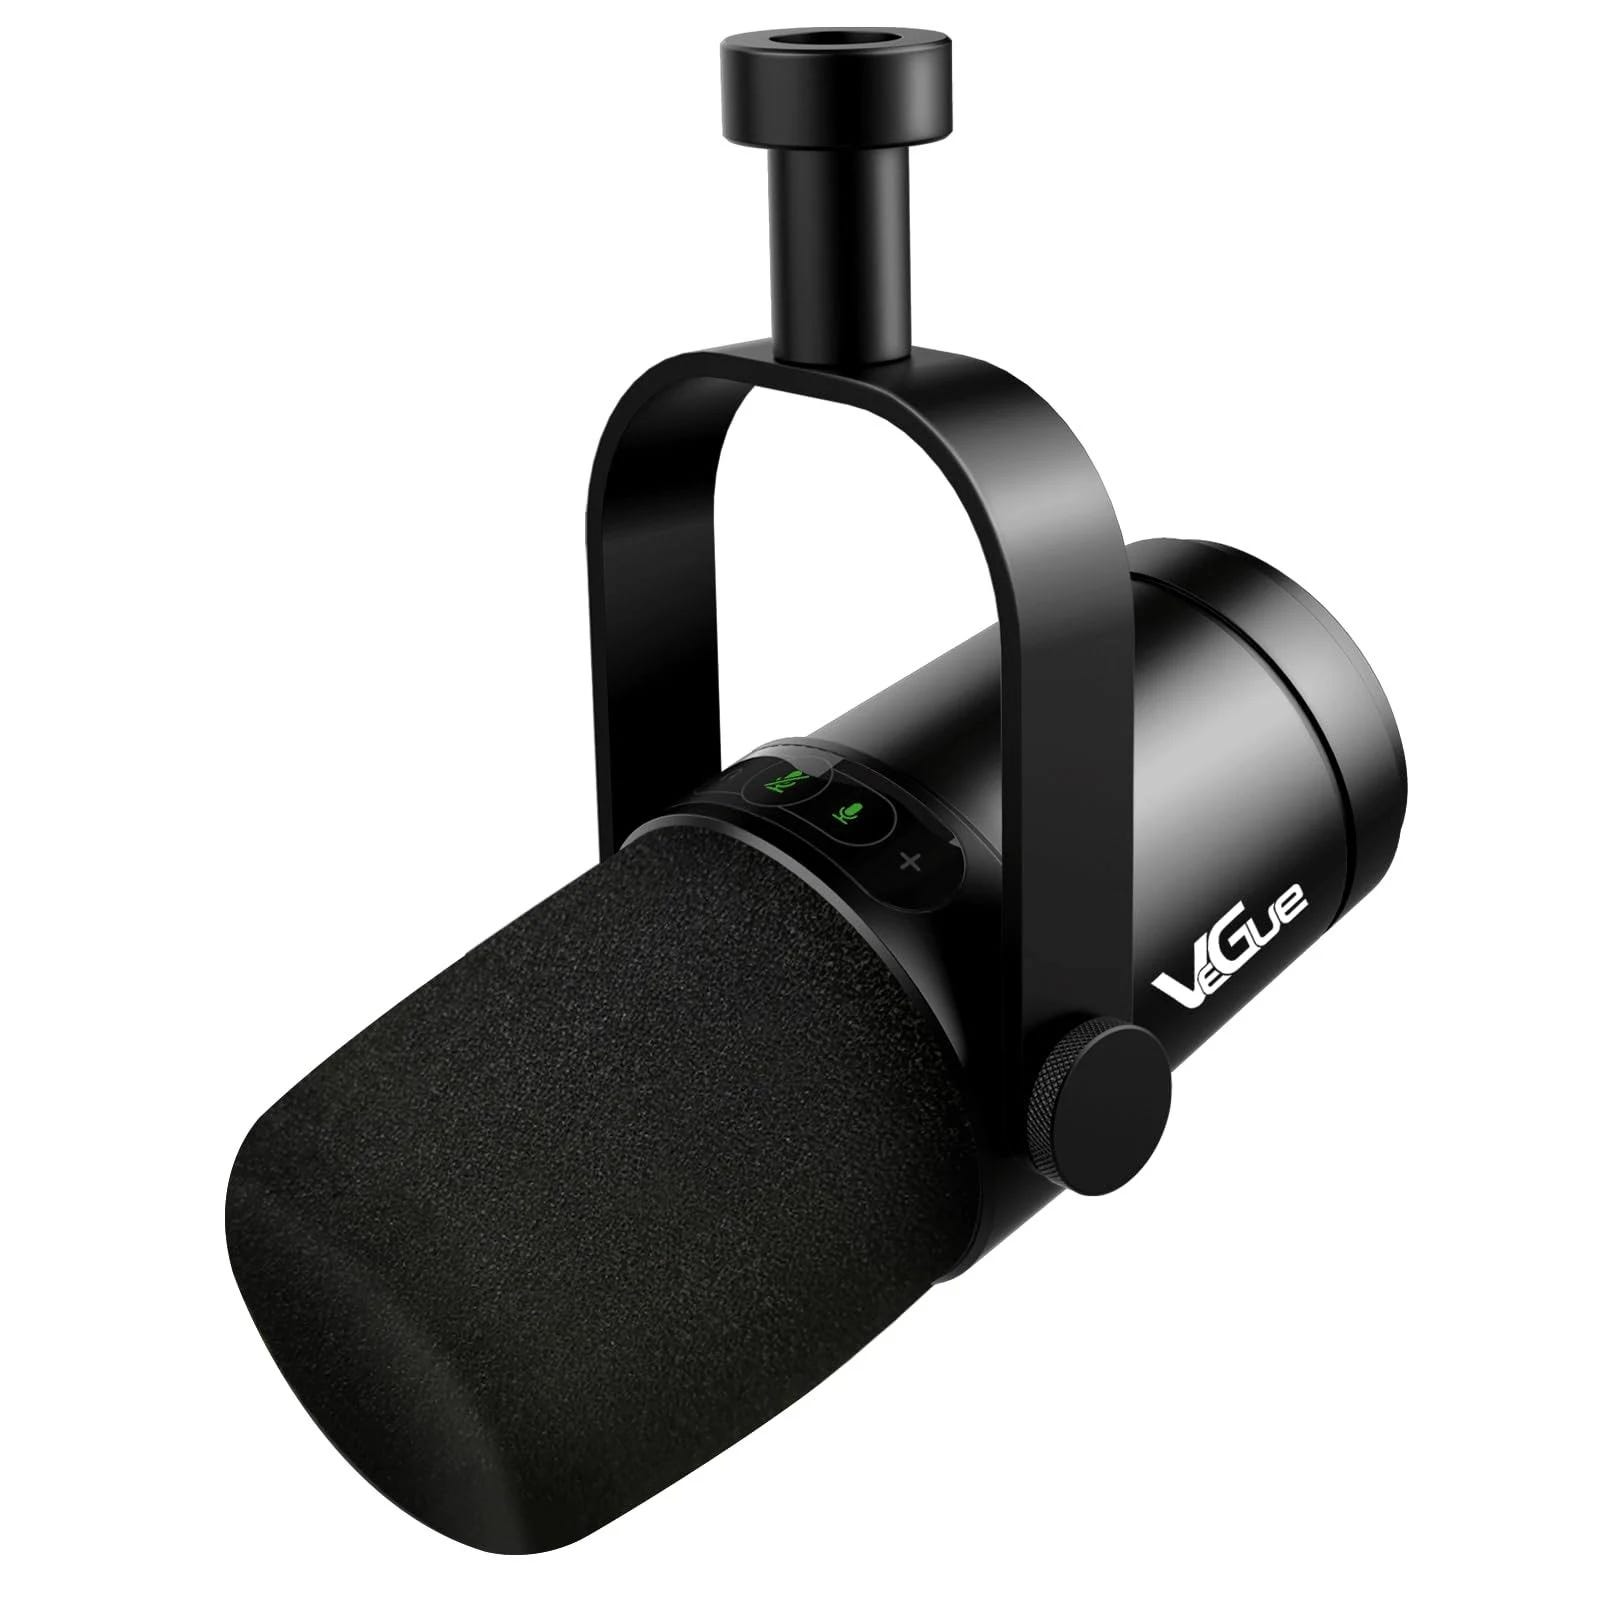 VeGue XLR Vocal Dynamic USB Microphone for Podcasting & Live Streaming | Image